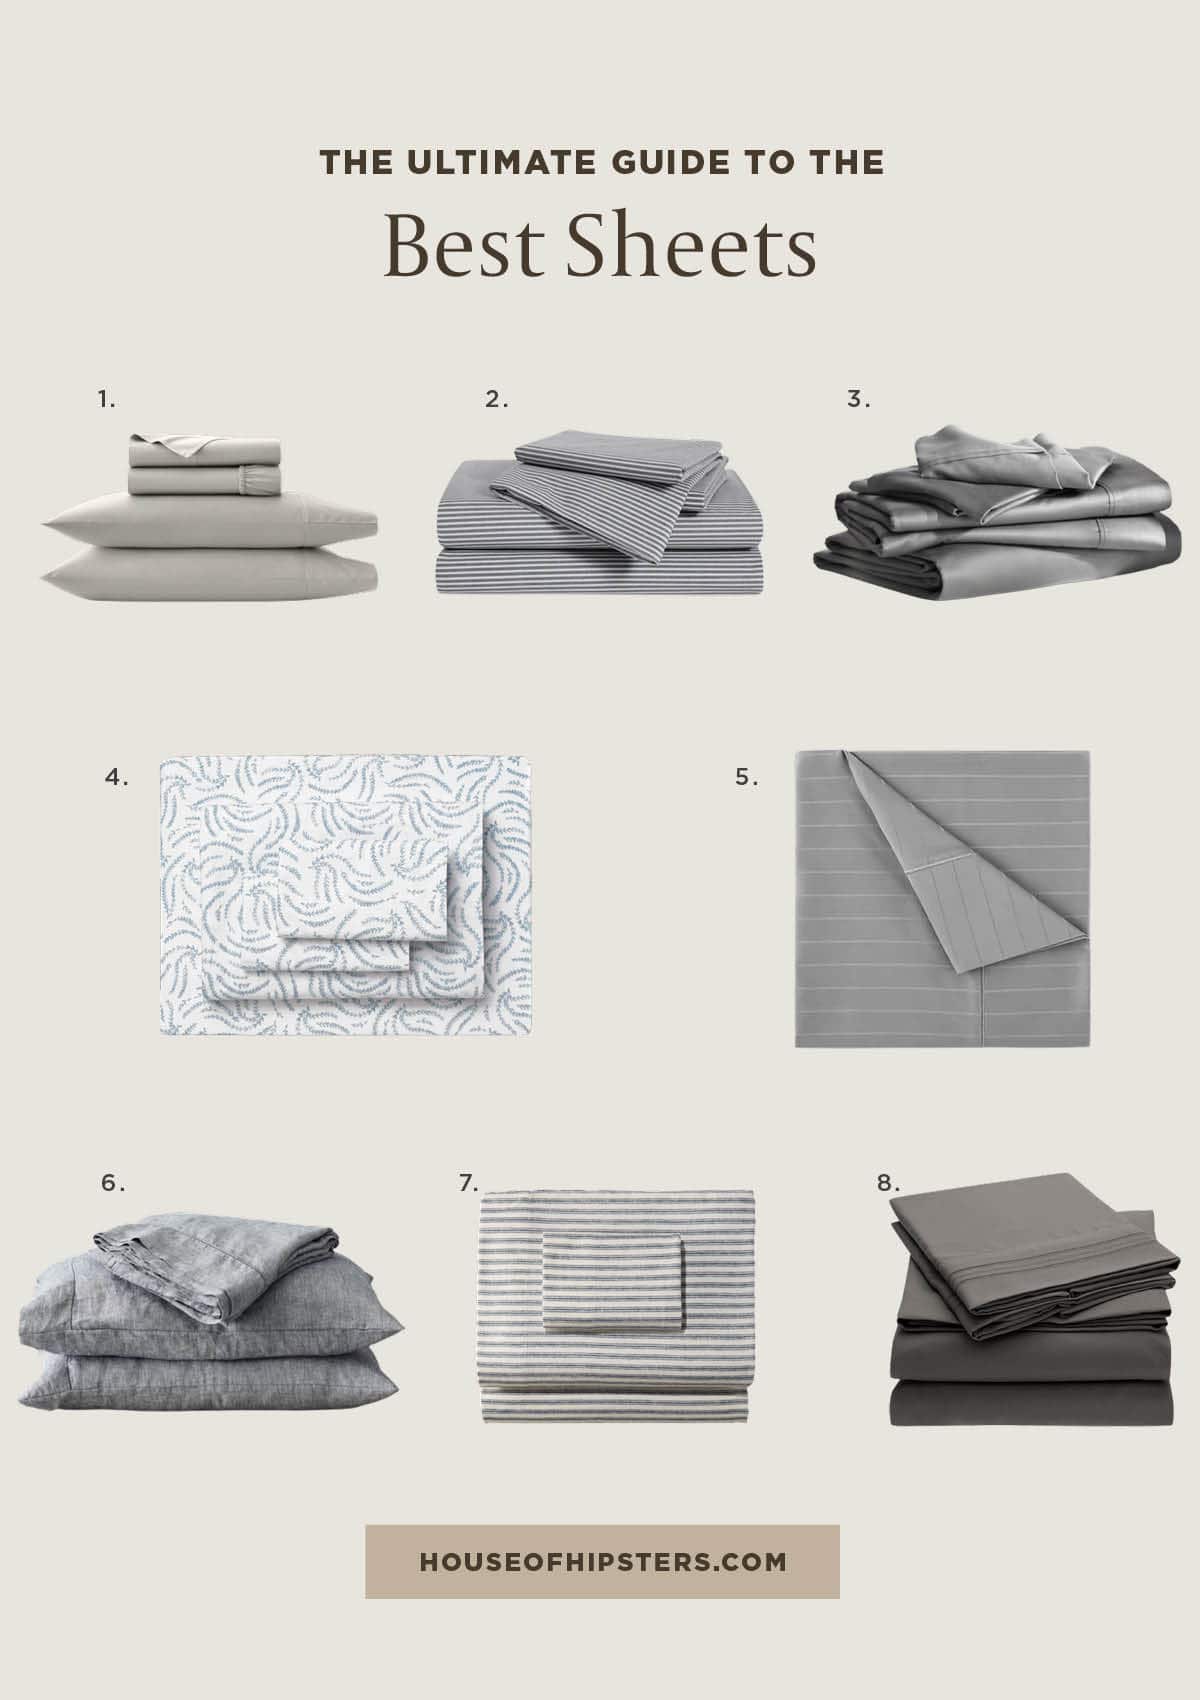 The 9 Best Sheets - Buying sheets isn't easy because there's so many to choose from. I've rounded up the best sheets for hot sleepers, linen sheets, flannel, wrinkle free and more!